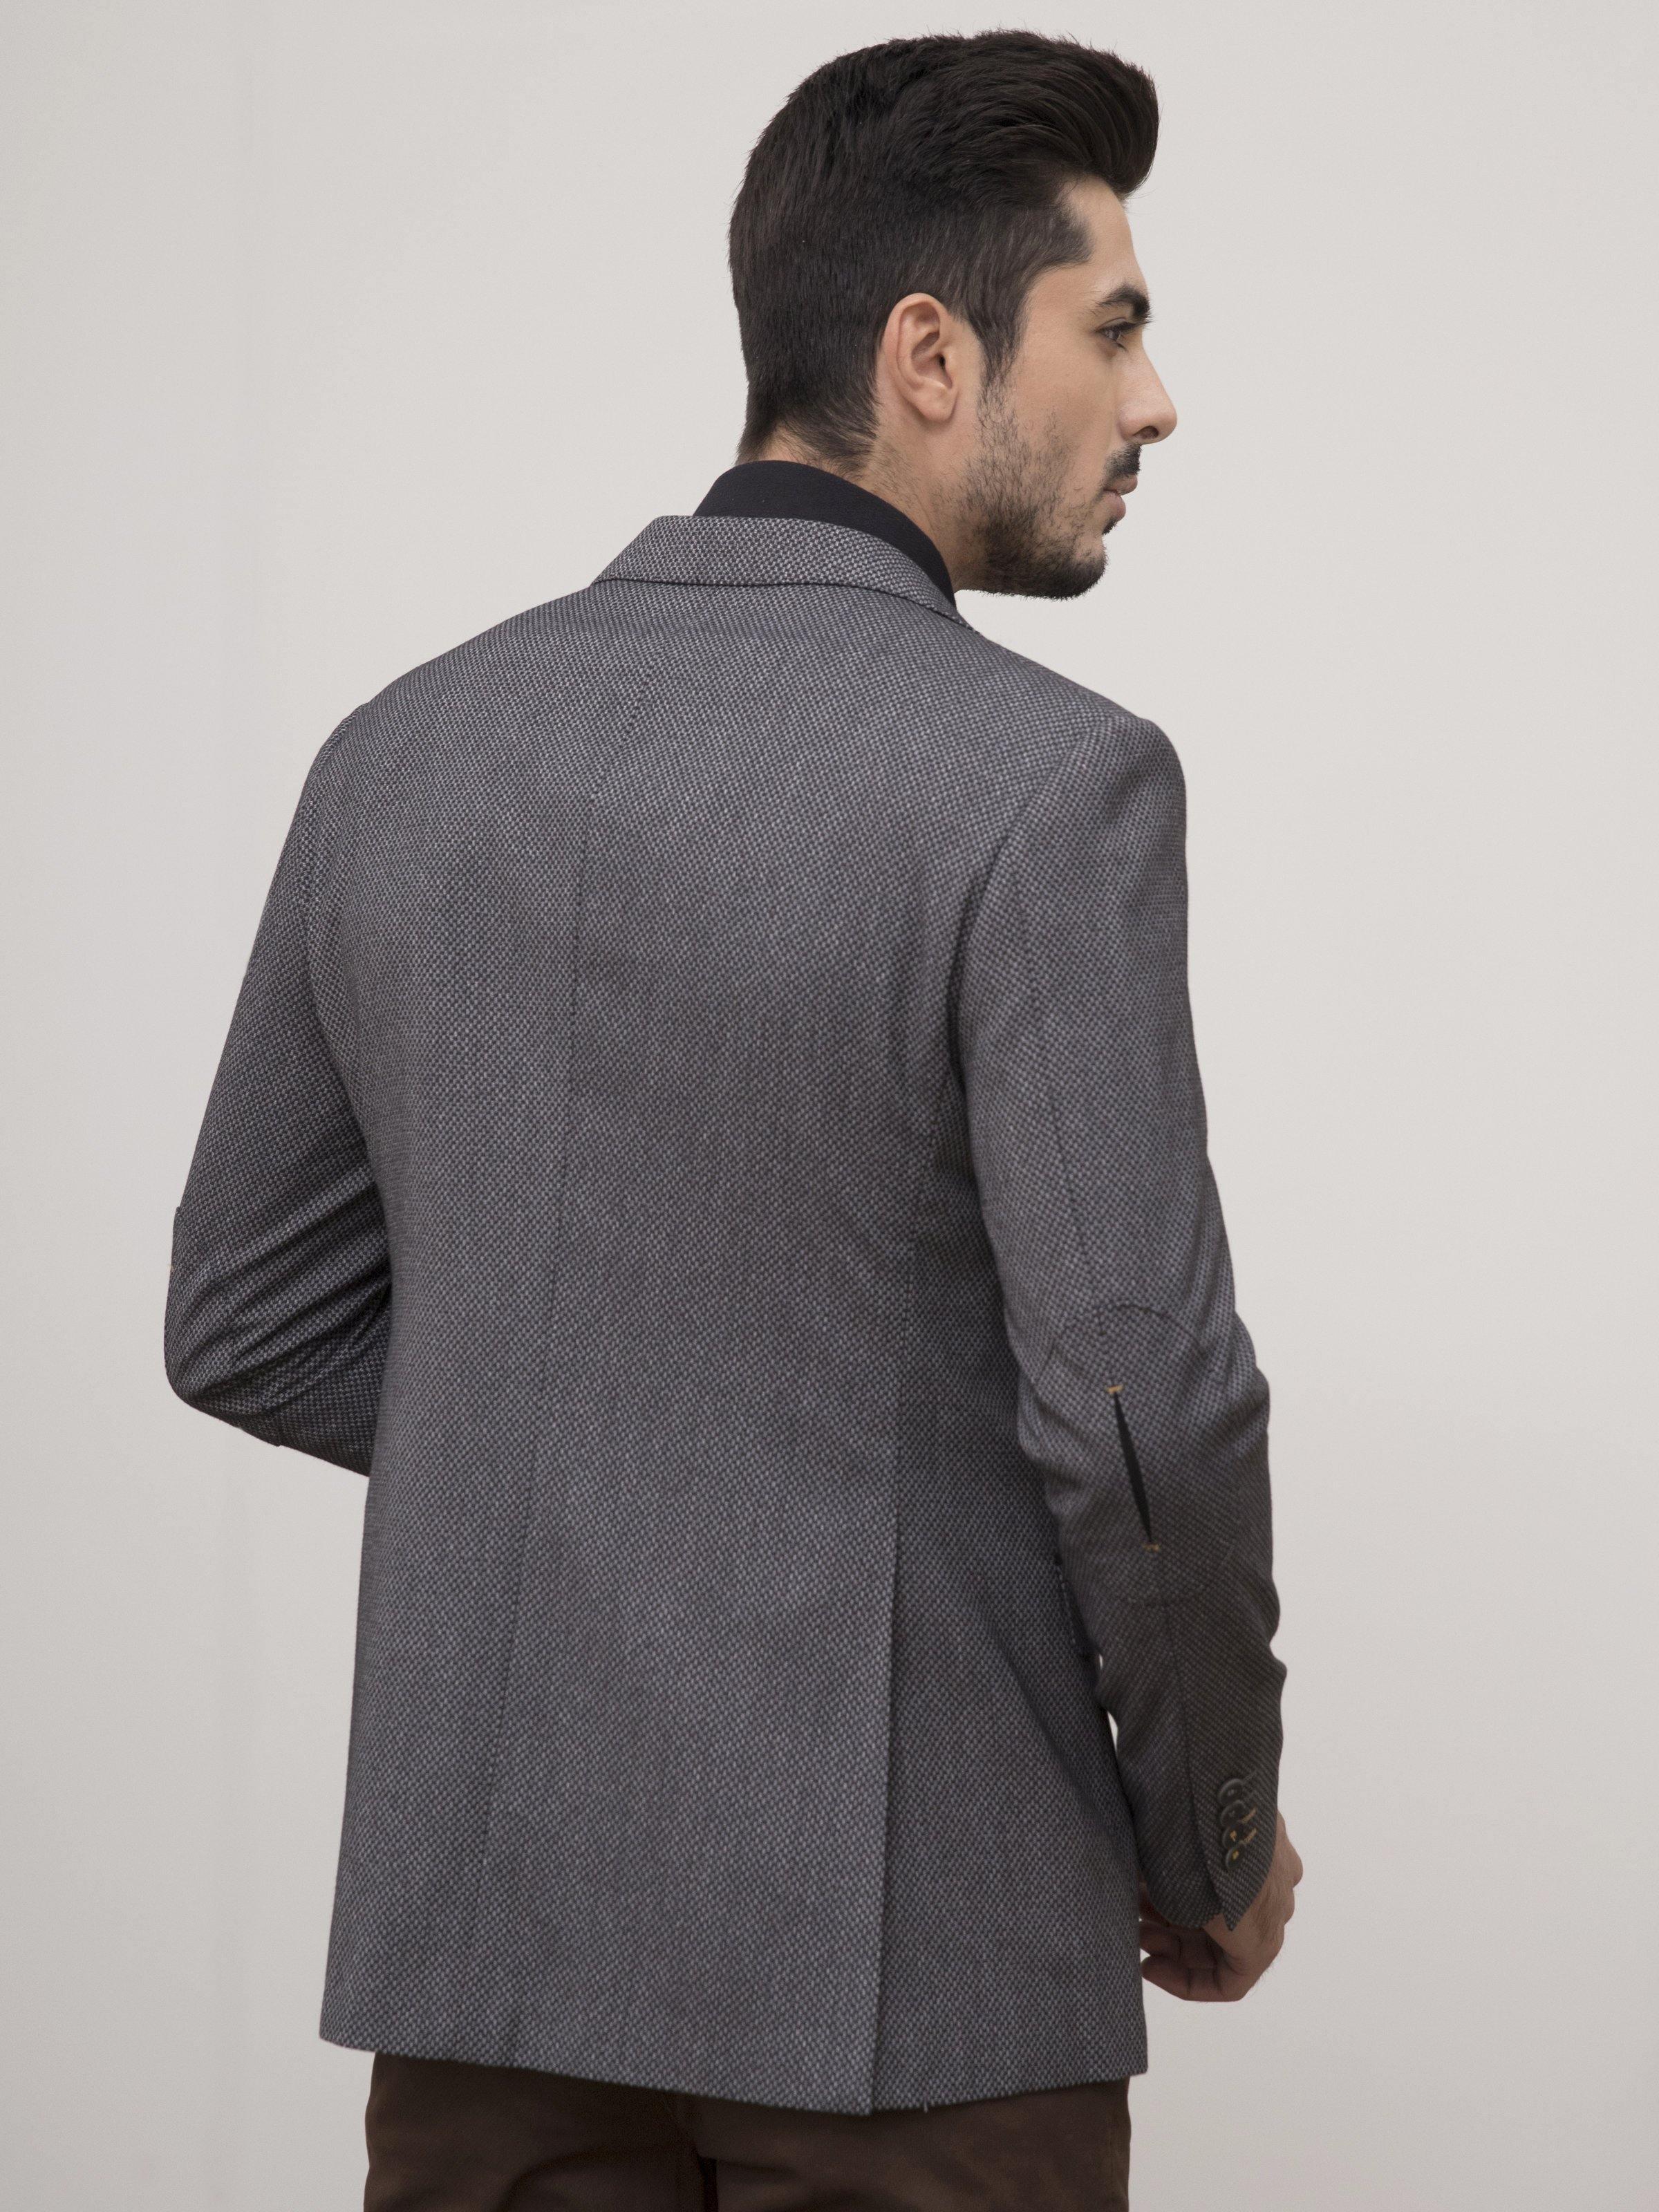 COAT 2 BUTTON SLIM FIT BLACK GREY at Charcoal Clothing